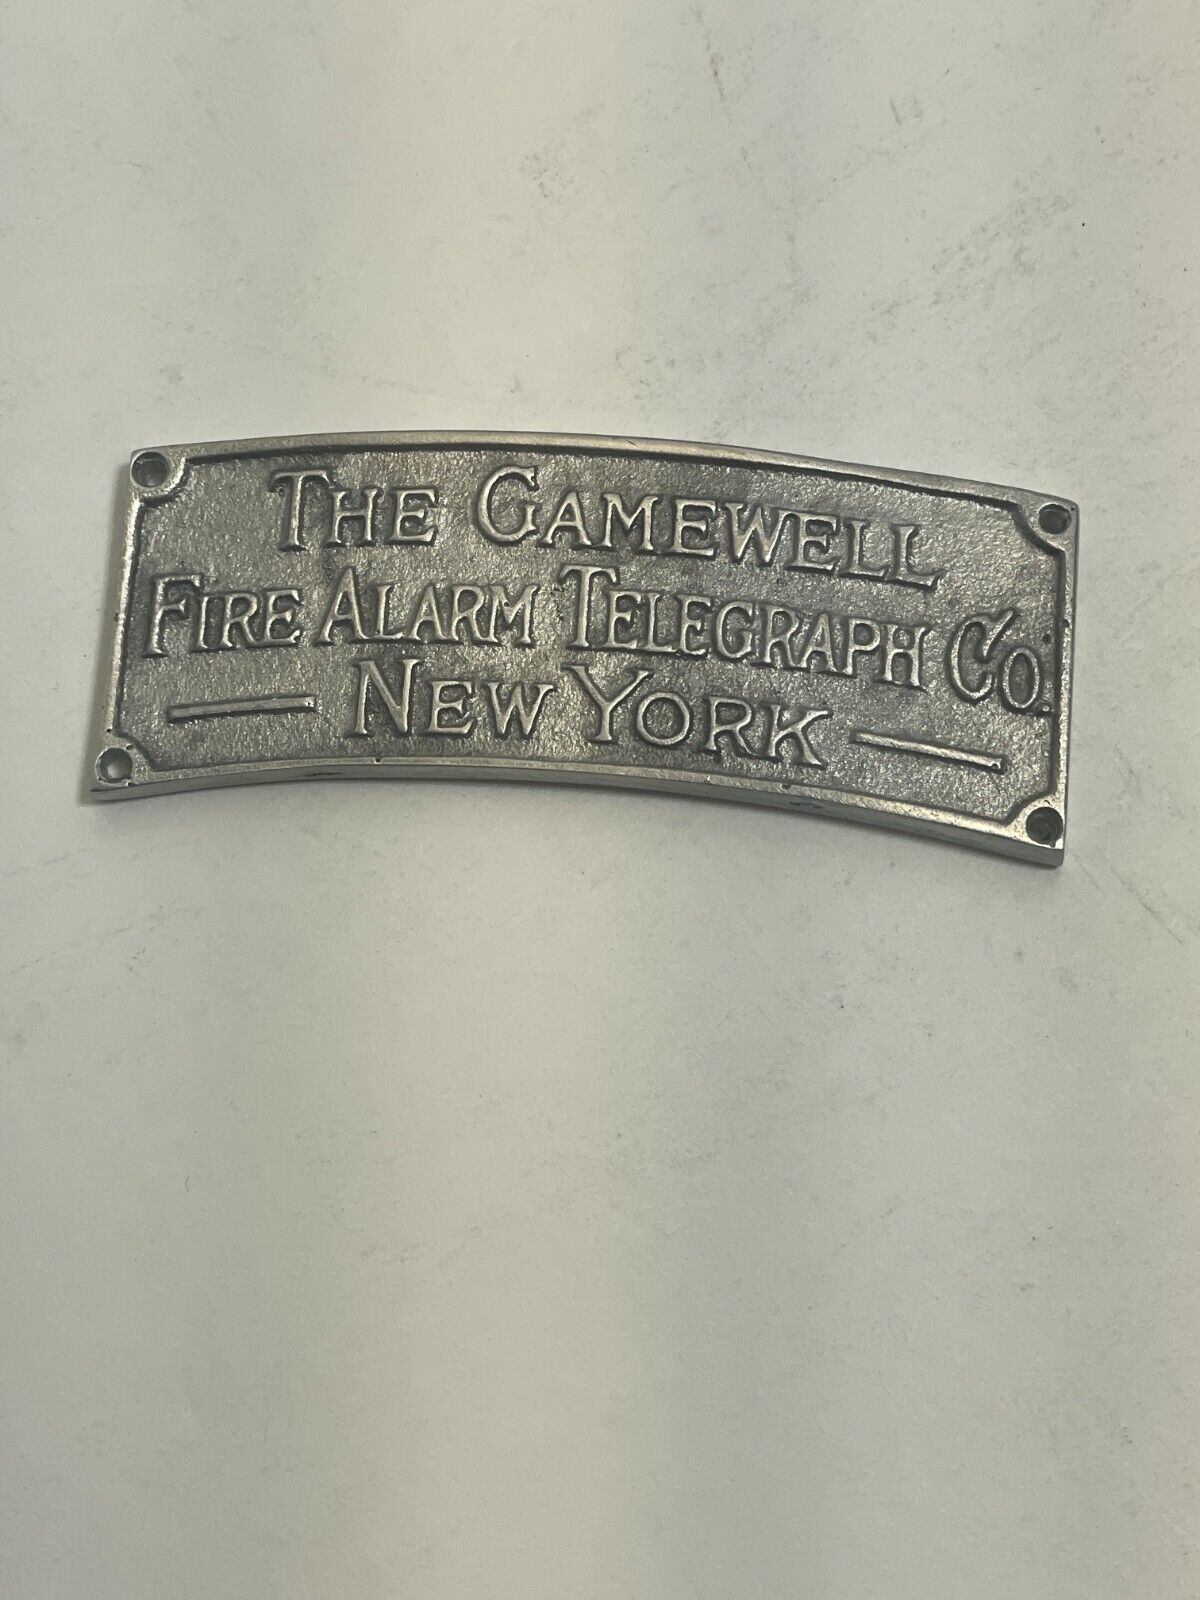 The Gamewell Fire Alarm Telegraph Co. New York  Nameplate Name Plate Emblem